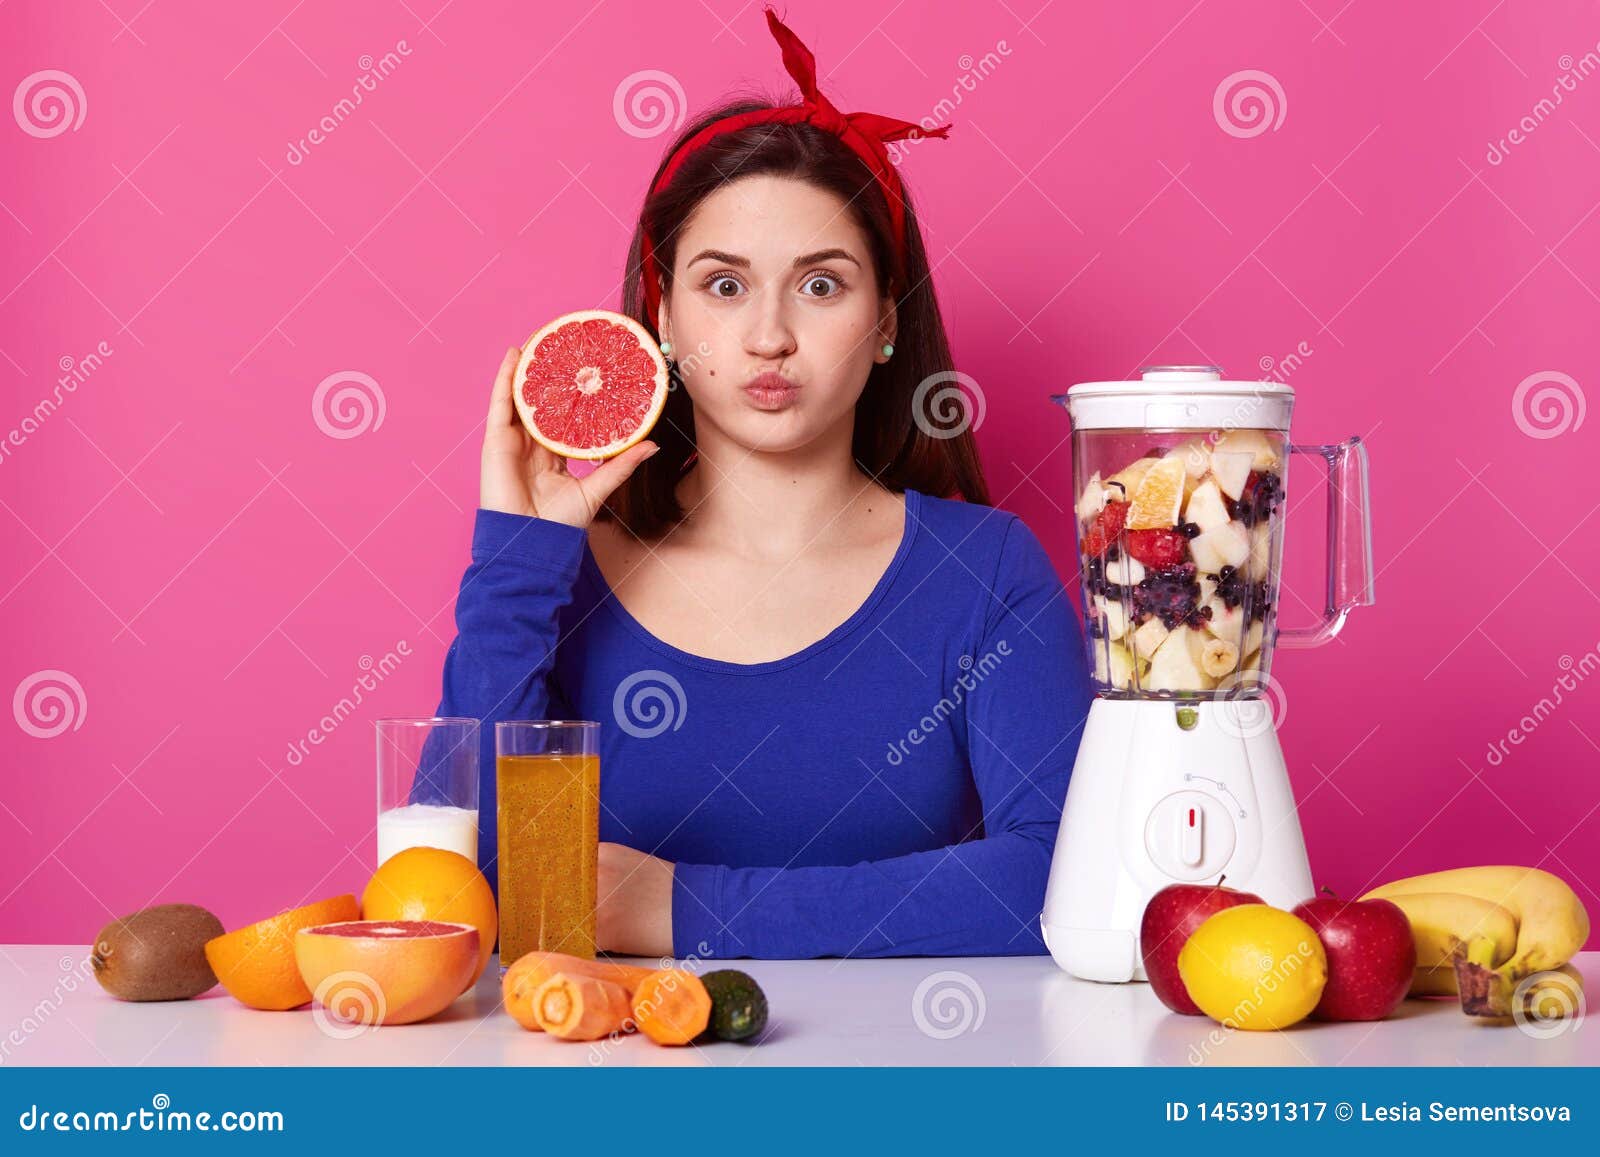 healthy vegeterian girl openes her eyes widely, blows her mouth, looking directly at camera, holding fruit in one hand. different